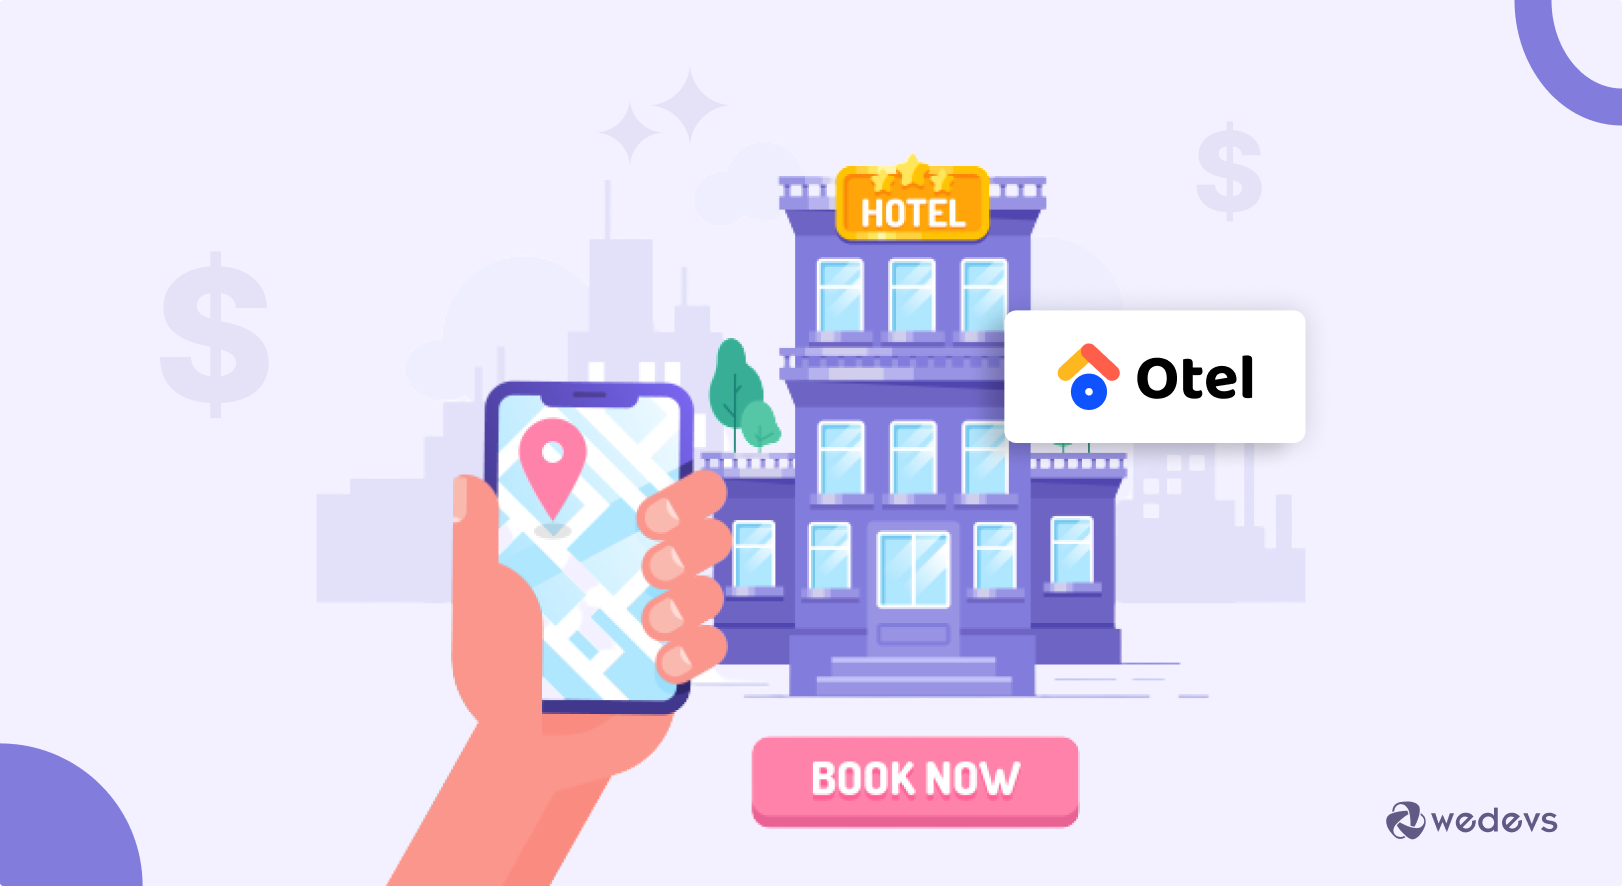 Build A Full-Functional Hotel Booking Website and Make Money Online